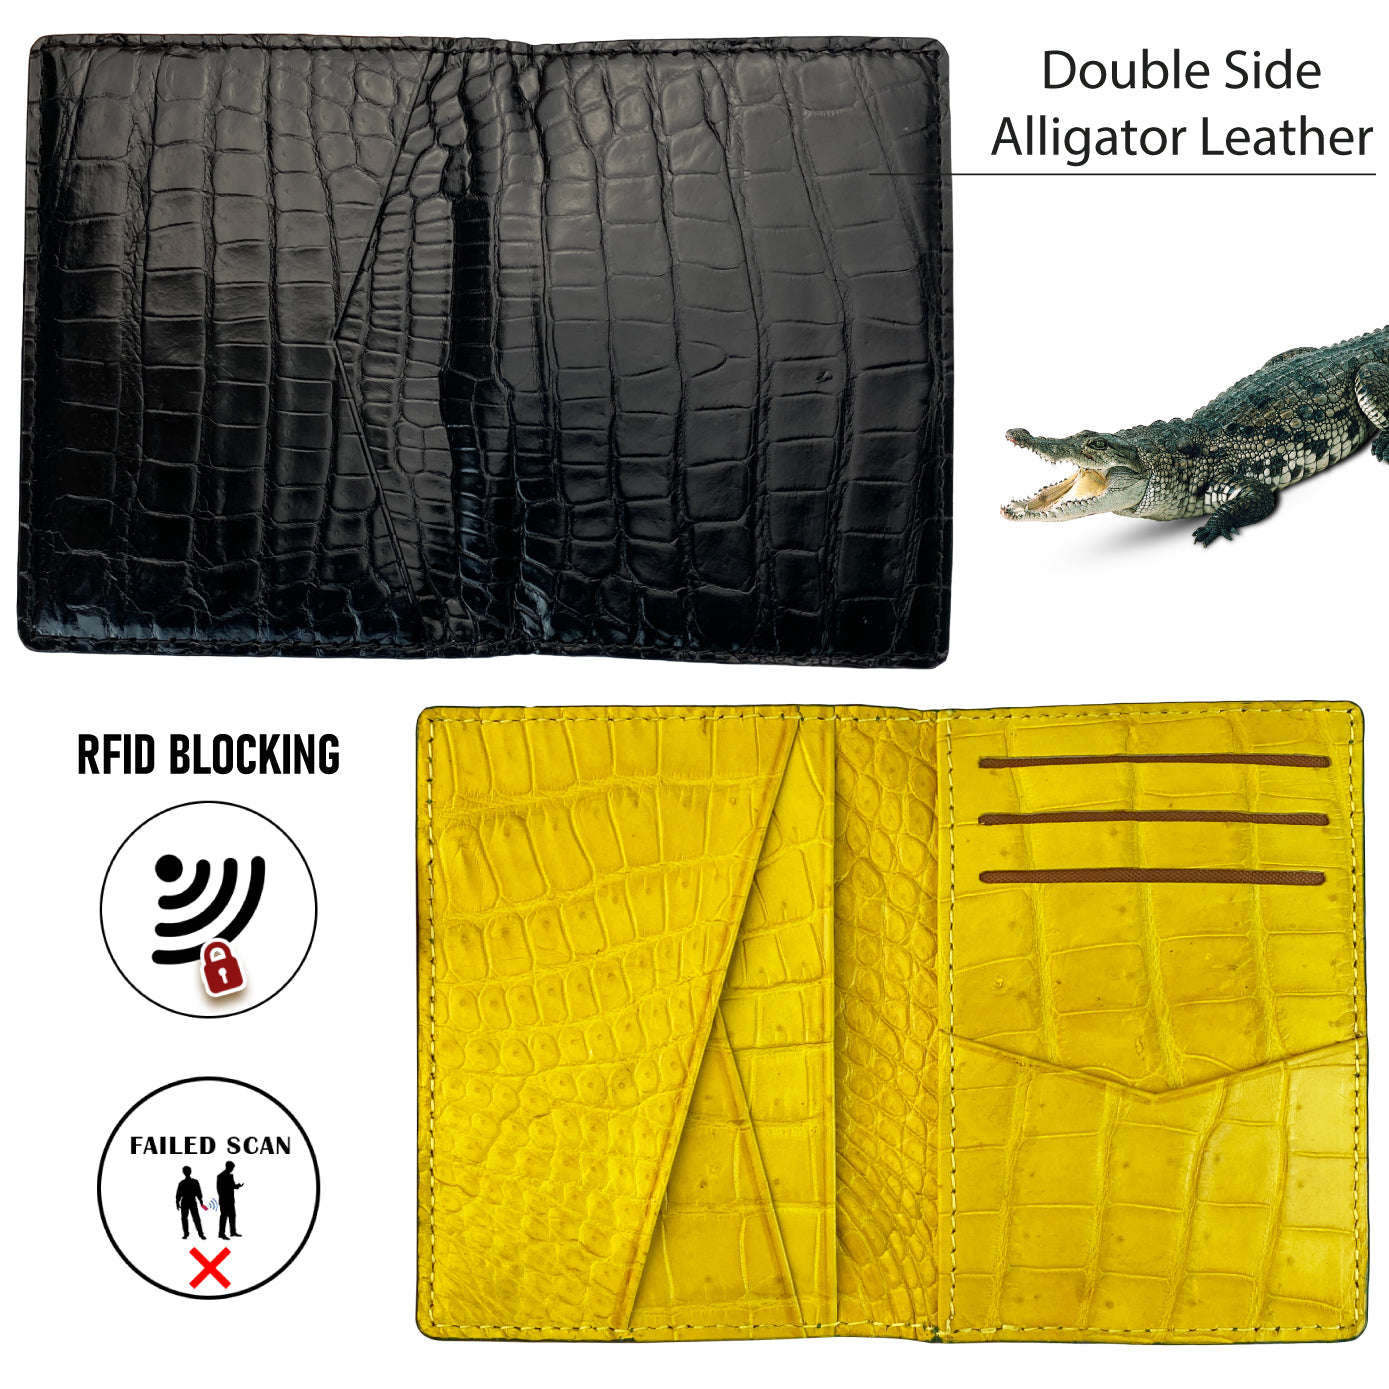 Black & Yellow Double Side Alligator Leather Credit Card Holder | RFID Blocking | CARD-19